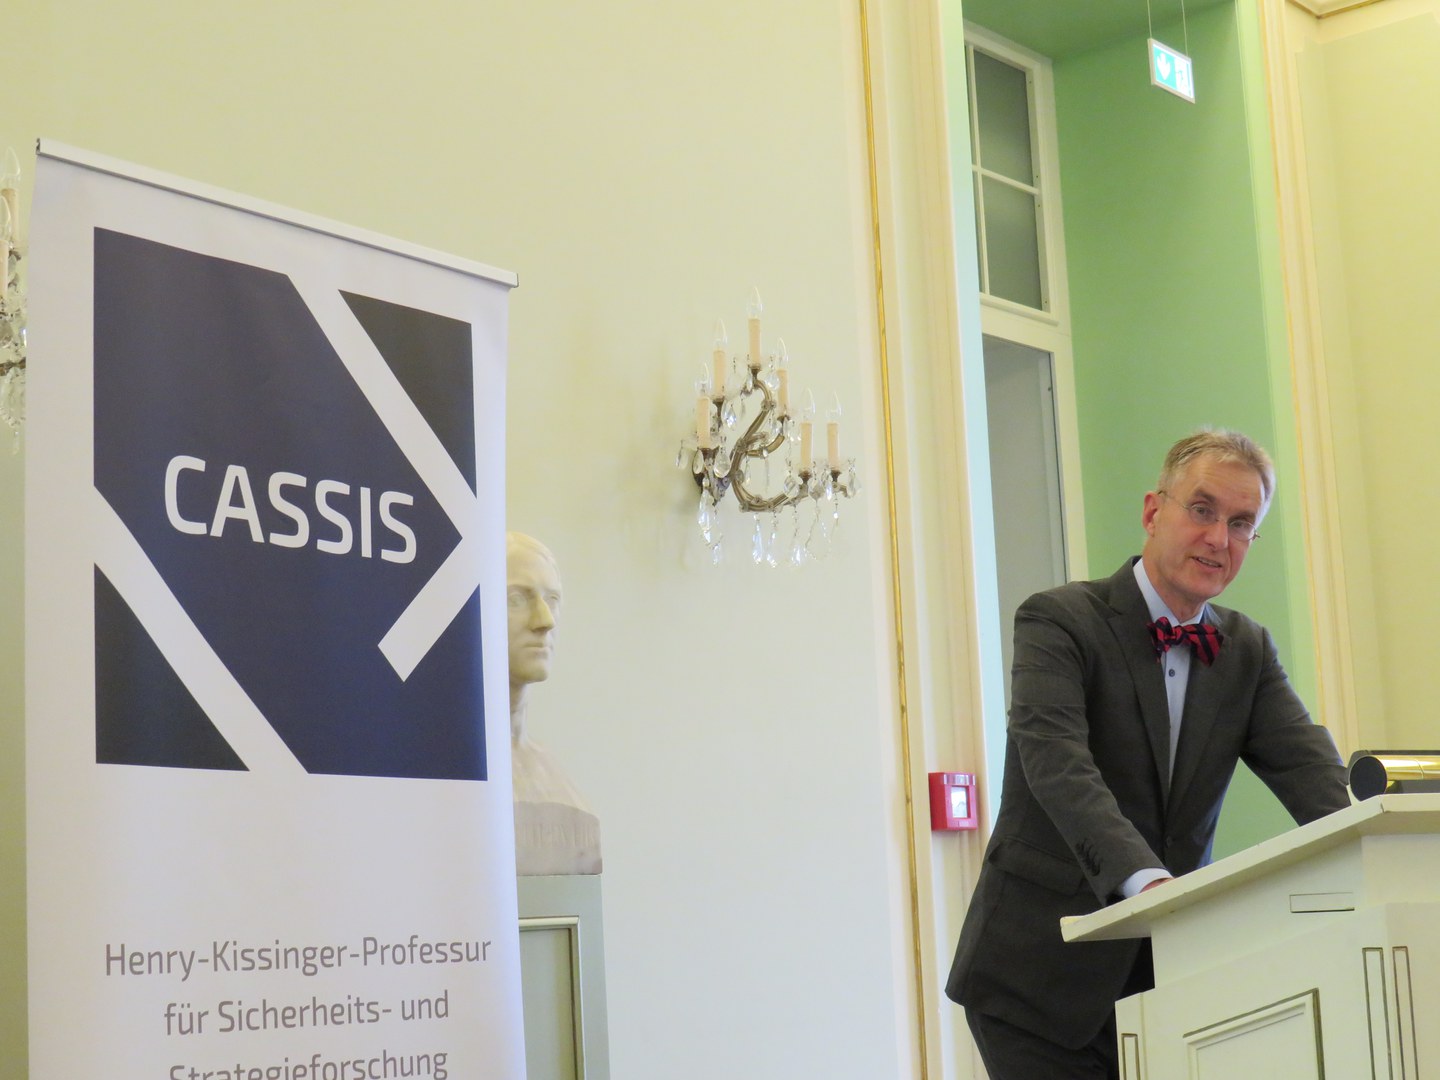 Prof. Dr. Ulrich Schlie welcomed the guests